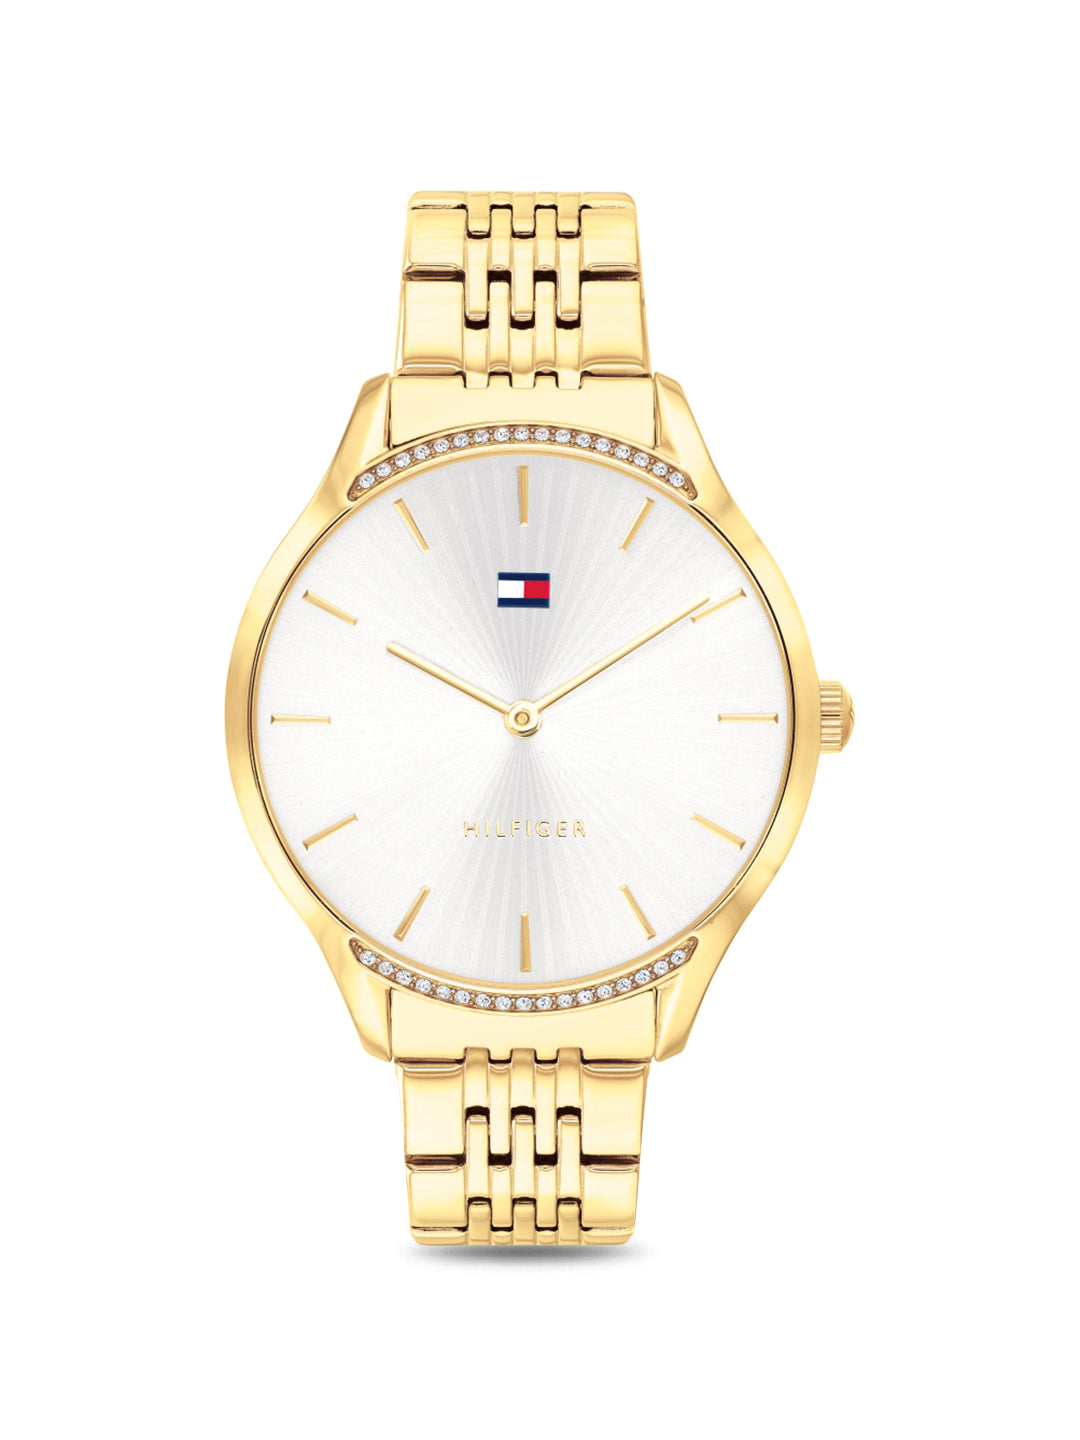 Tommy Hilfiger TH1782211 Analog Watch for Women